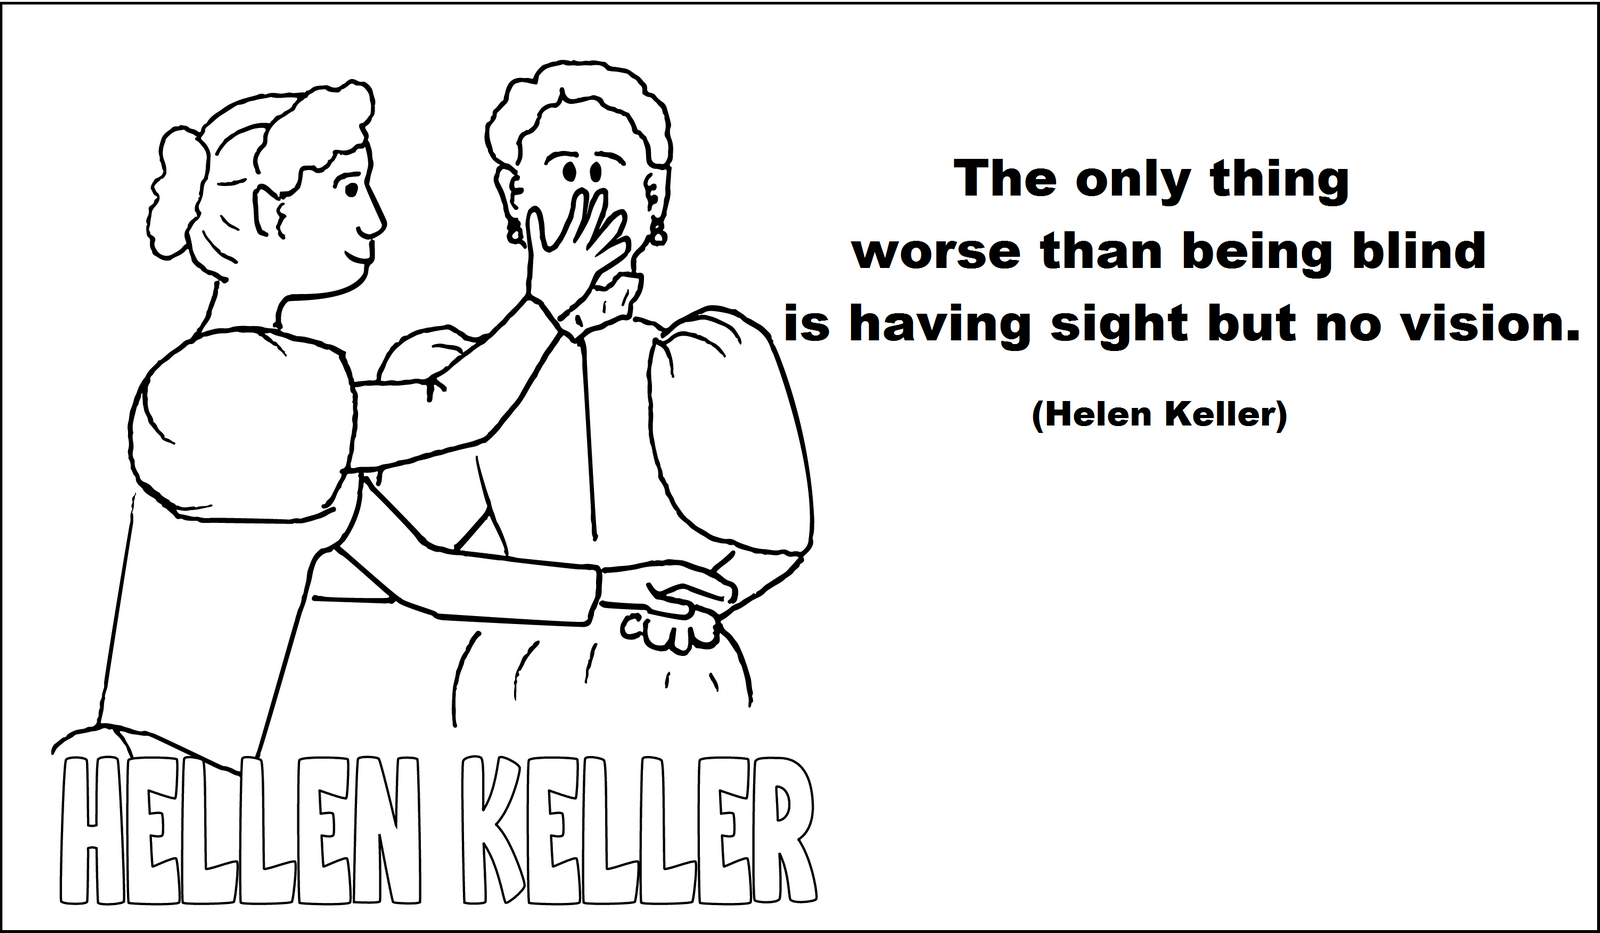 Helen Keller and quotes coloring page